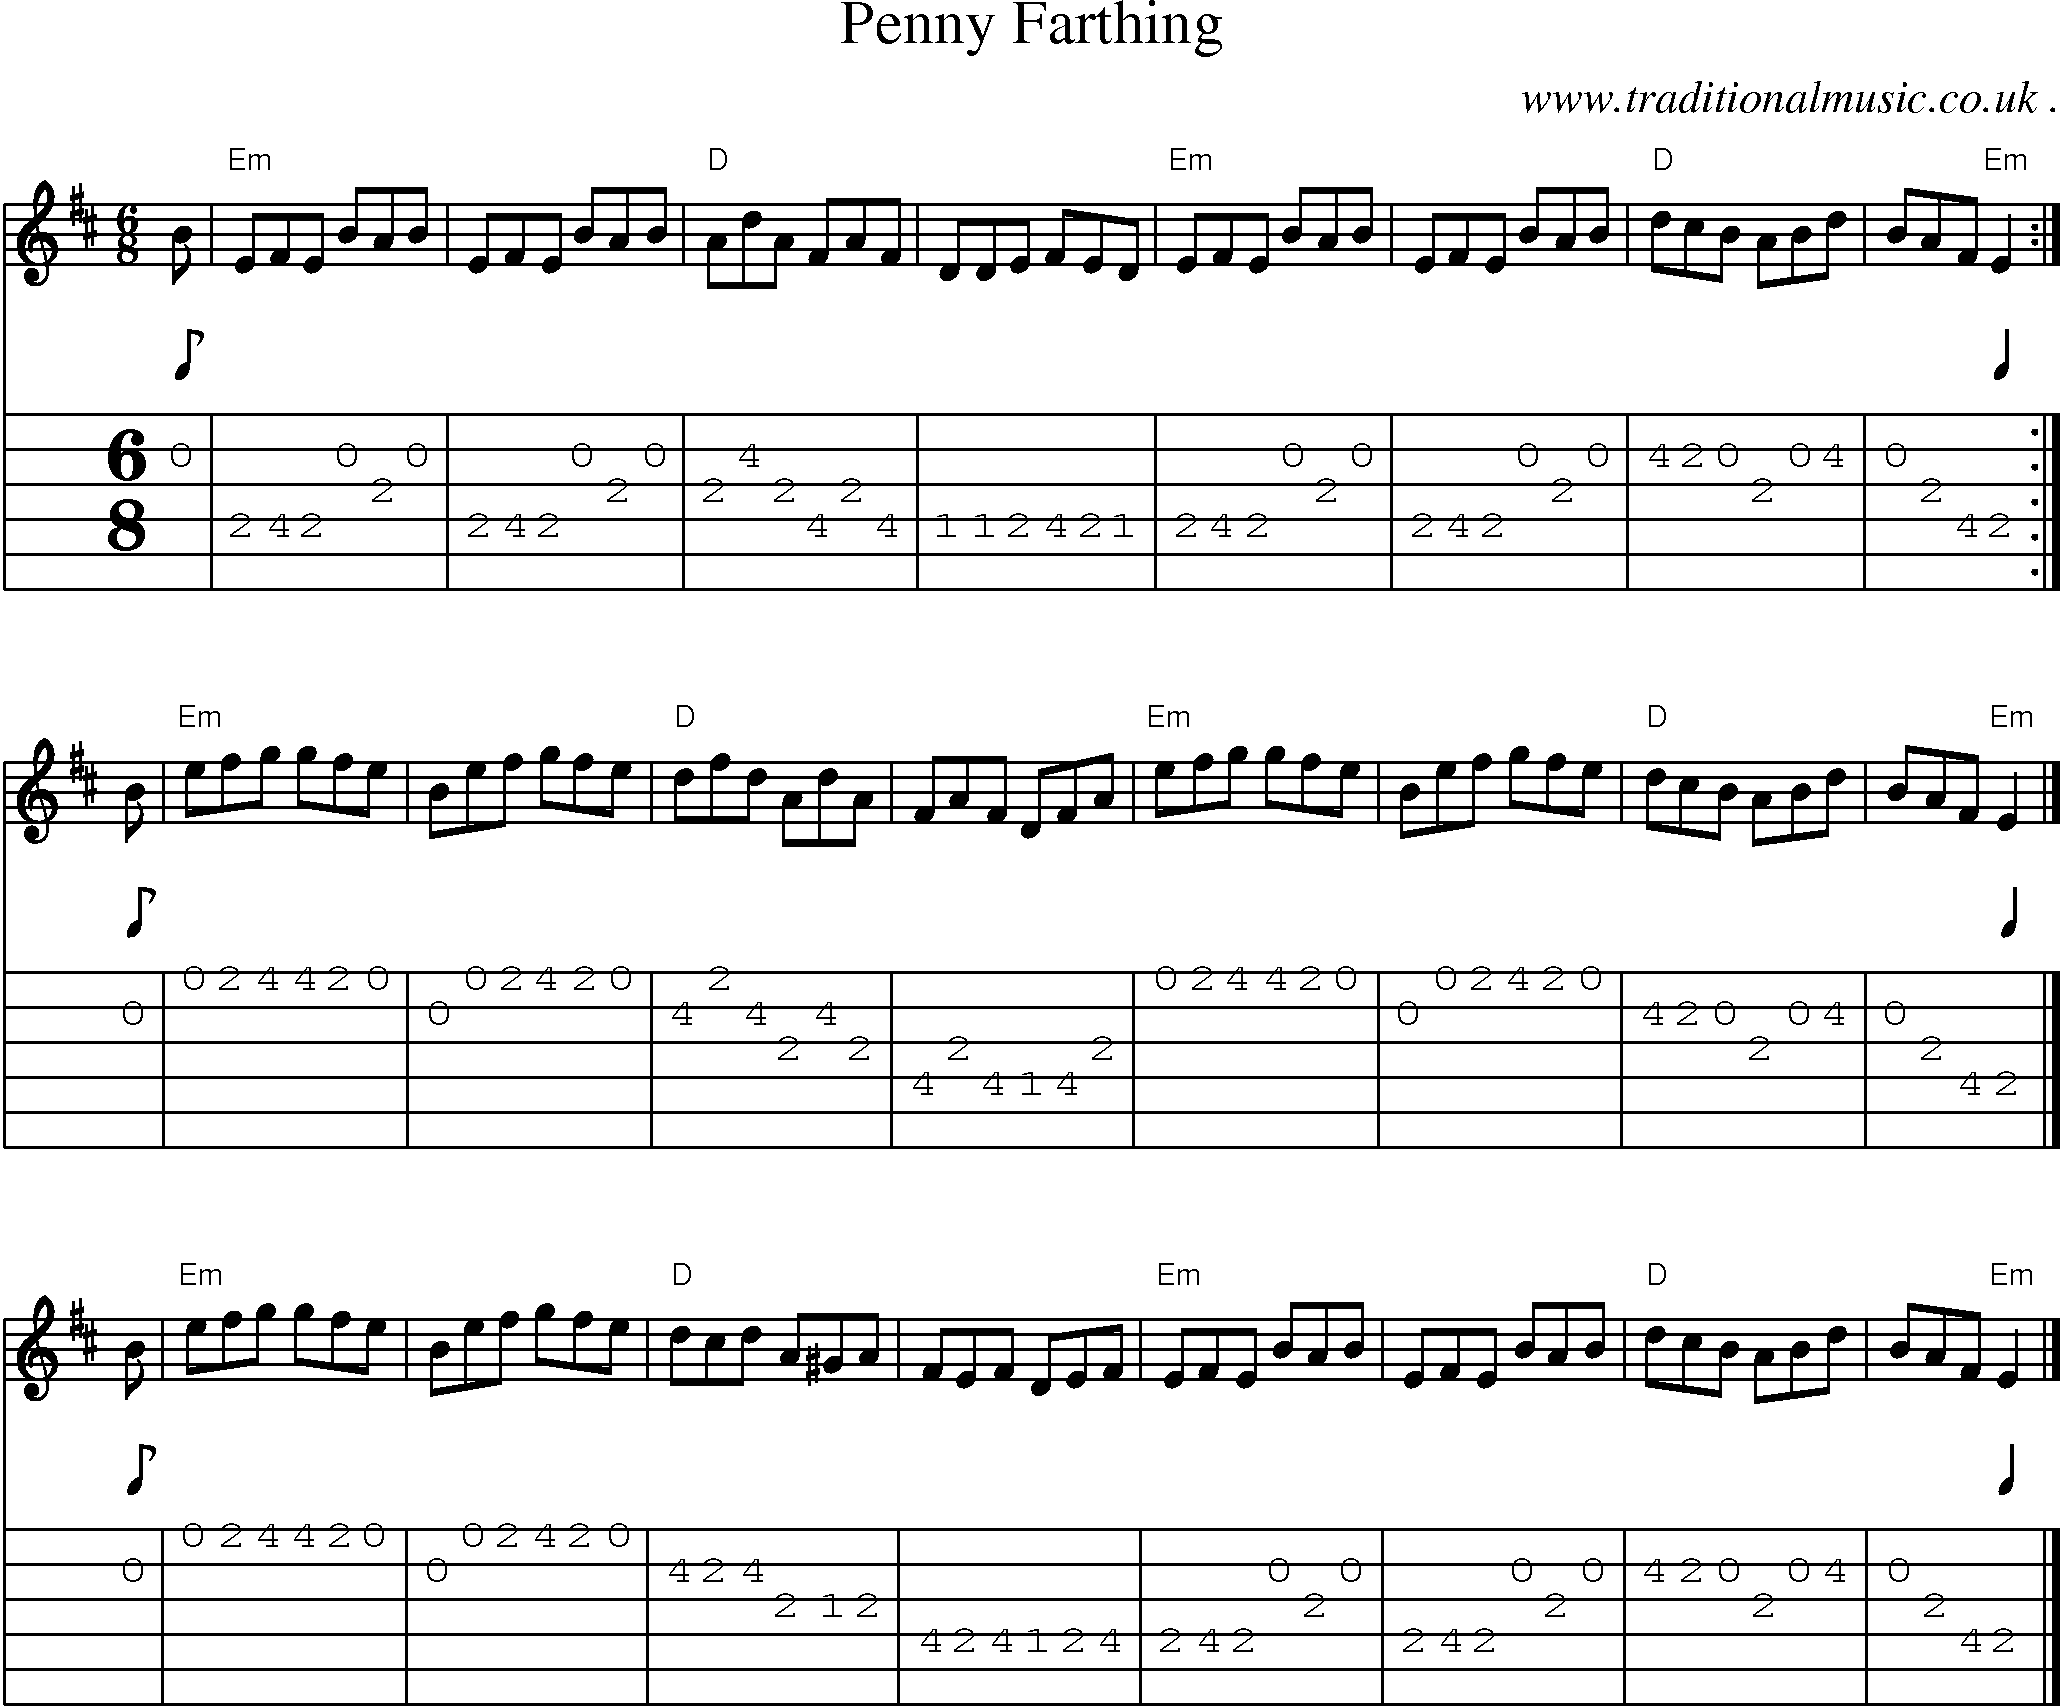 Sheet-music  score, Chords and Guitar Tabs for Penny Farthing